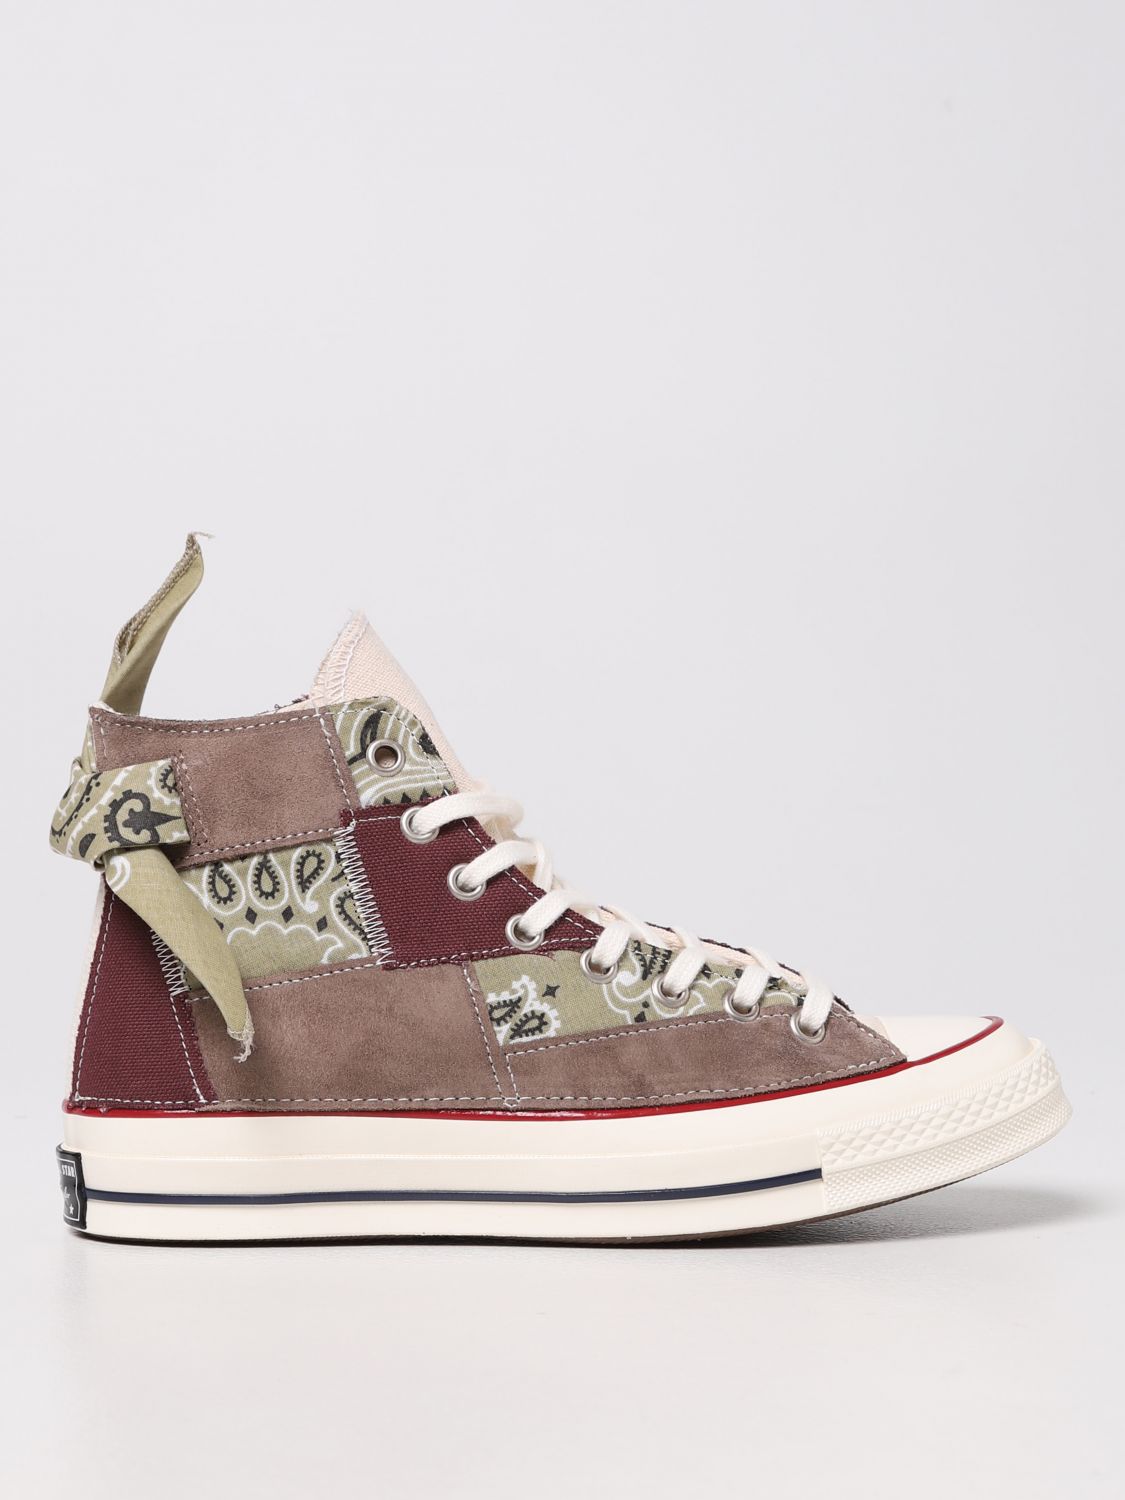 Drikke sig fuld Herre venlig Ringlet CONVERSE LIMITED EDITION: Chuck Taylon 70 patchwork sneakers - Multicolor |  Converse Limited Edition sneakers 172907C online on GIGLIO.COM